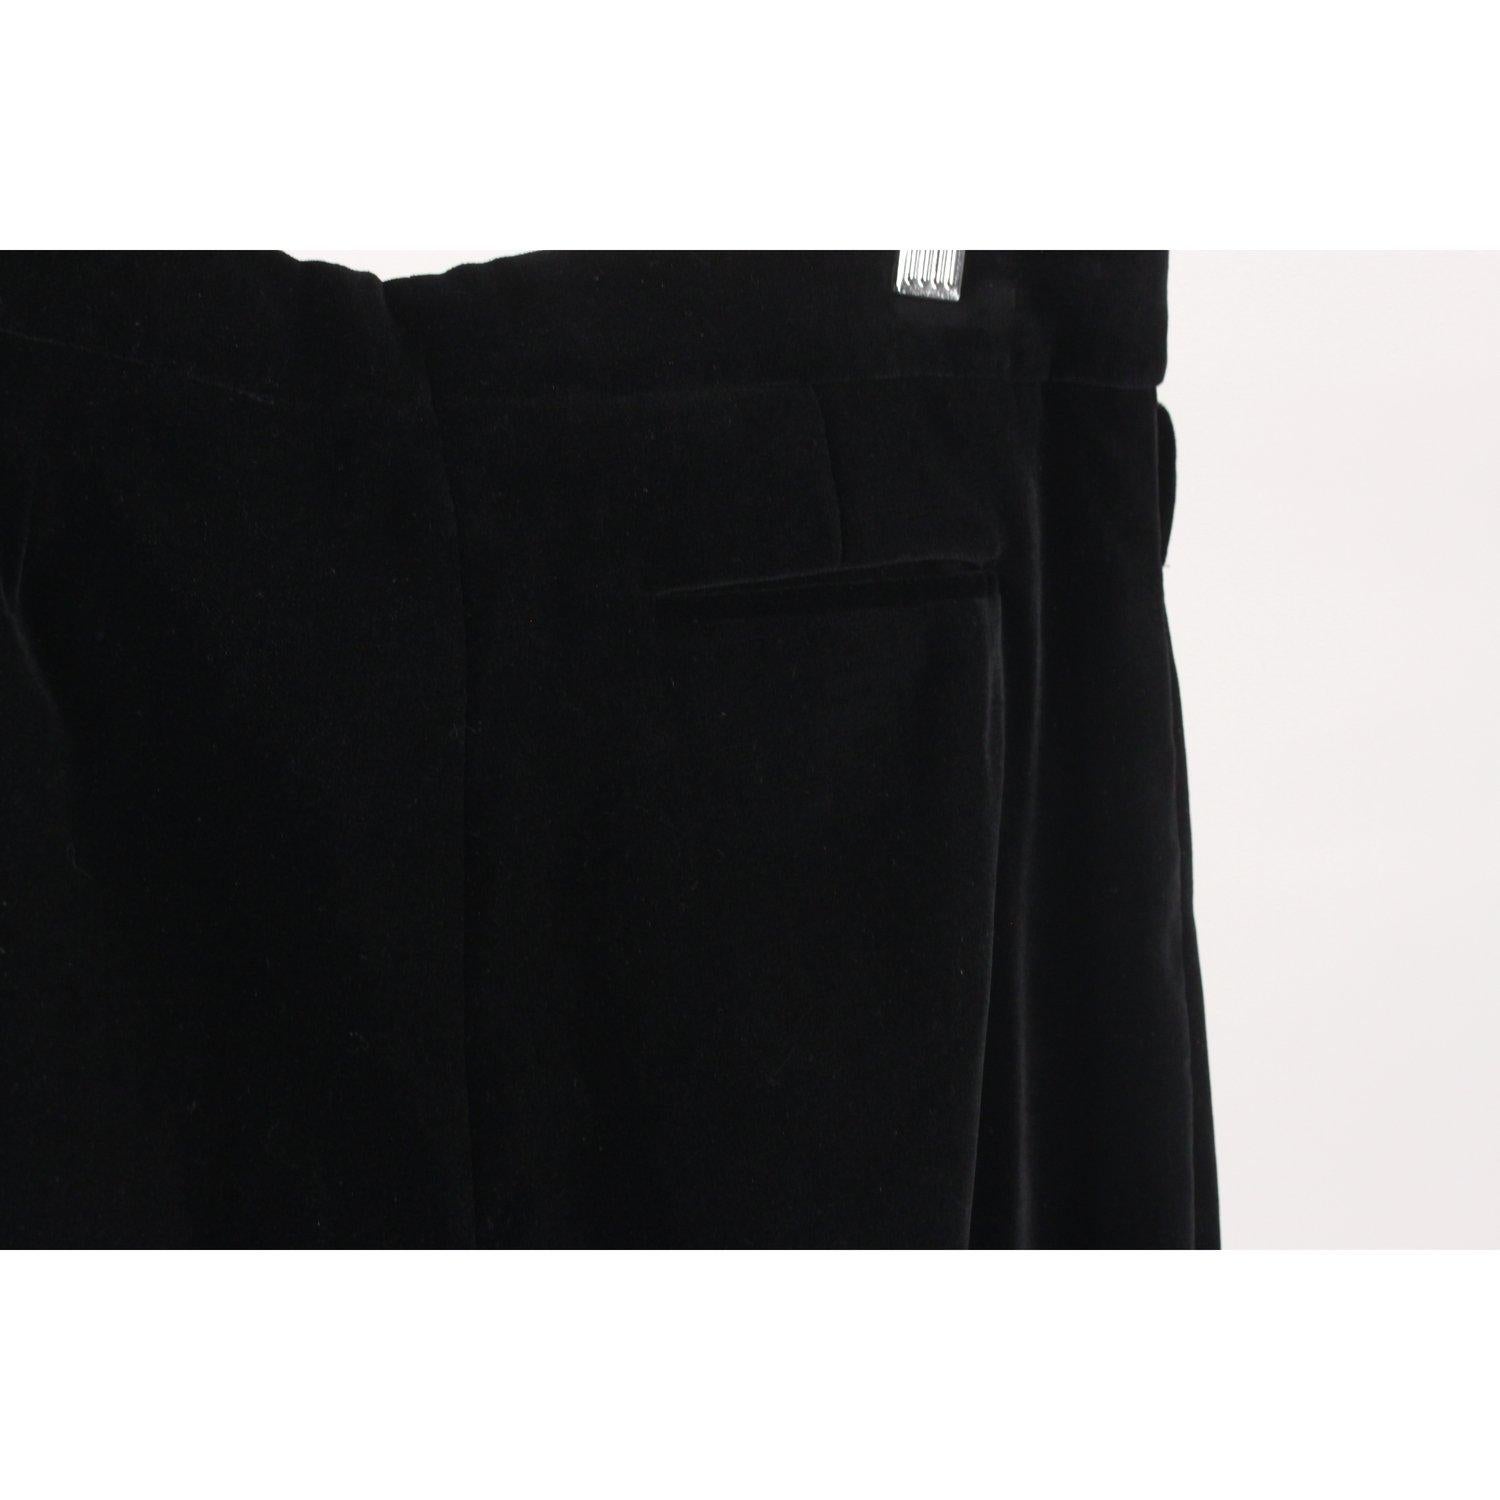 MATERIAL: Velvet COLOR: Black MODEL: Trousers GENDER: Women SIZE: Small COUNTRY OF MANUFACTURE: Italy Condition CONDITION DETAILS: B :GOOD CONDITION - Some light wear of use - Minimal pressure marks on the waist Measurements MEASUREMENTS: TOTAL